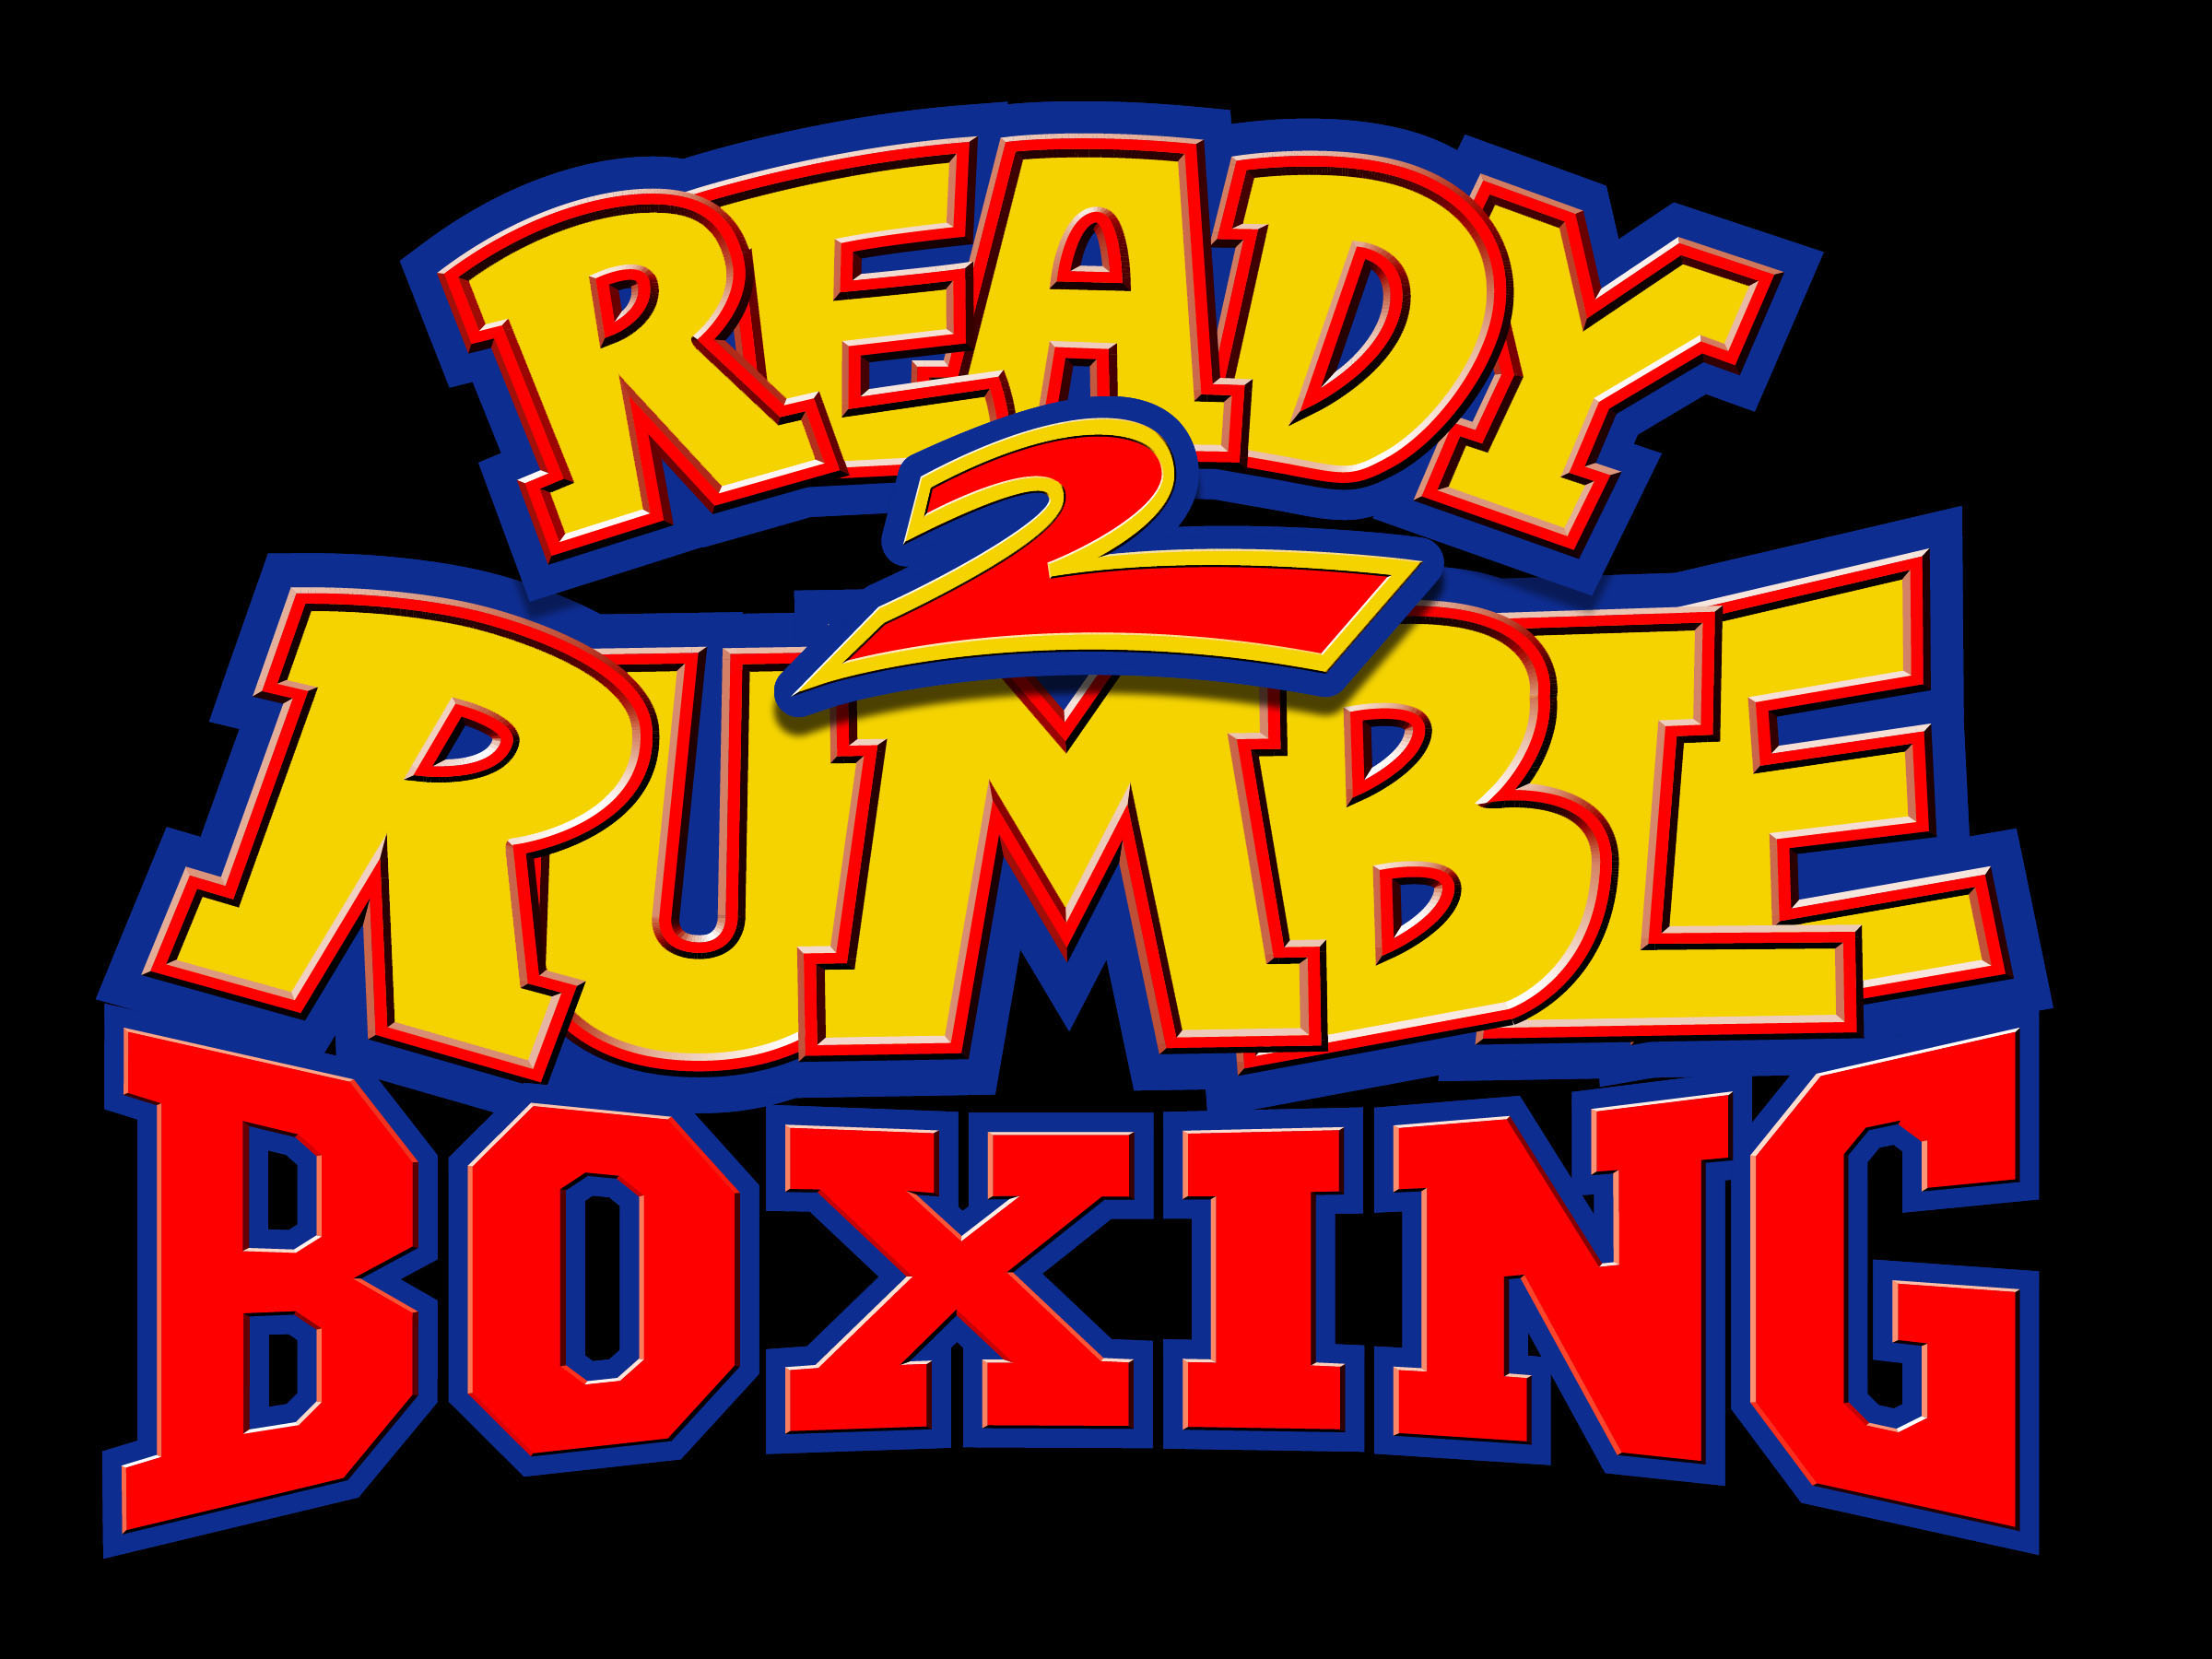 Dash round 2. Ready 2 Rumble Boxing: Round 2. Ready 2 Rumble Boxing - Round 2 ps1 обложка. Ready 2 Rumble Boxing Dreamcast. Сега Дримкаст ready Rumble 2.